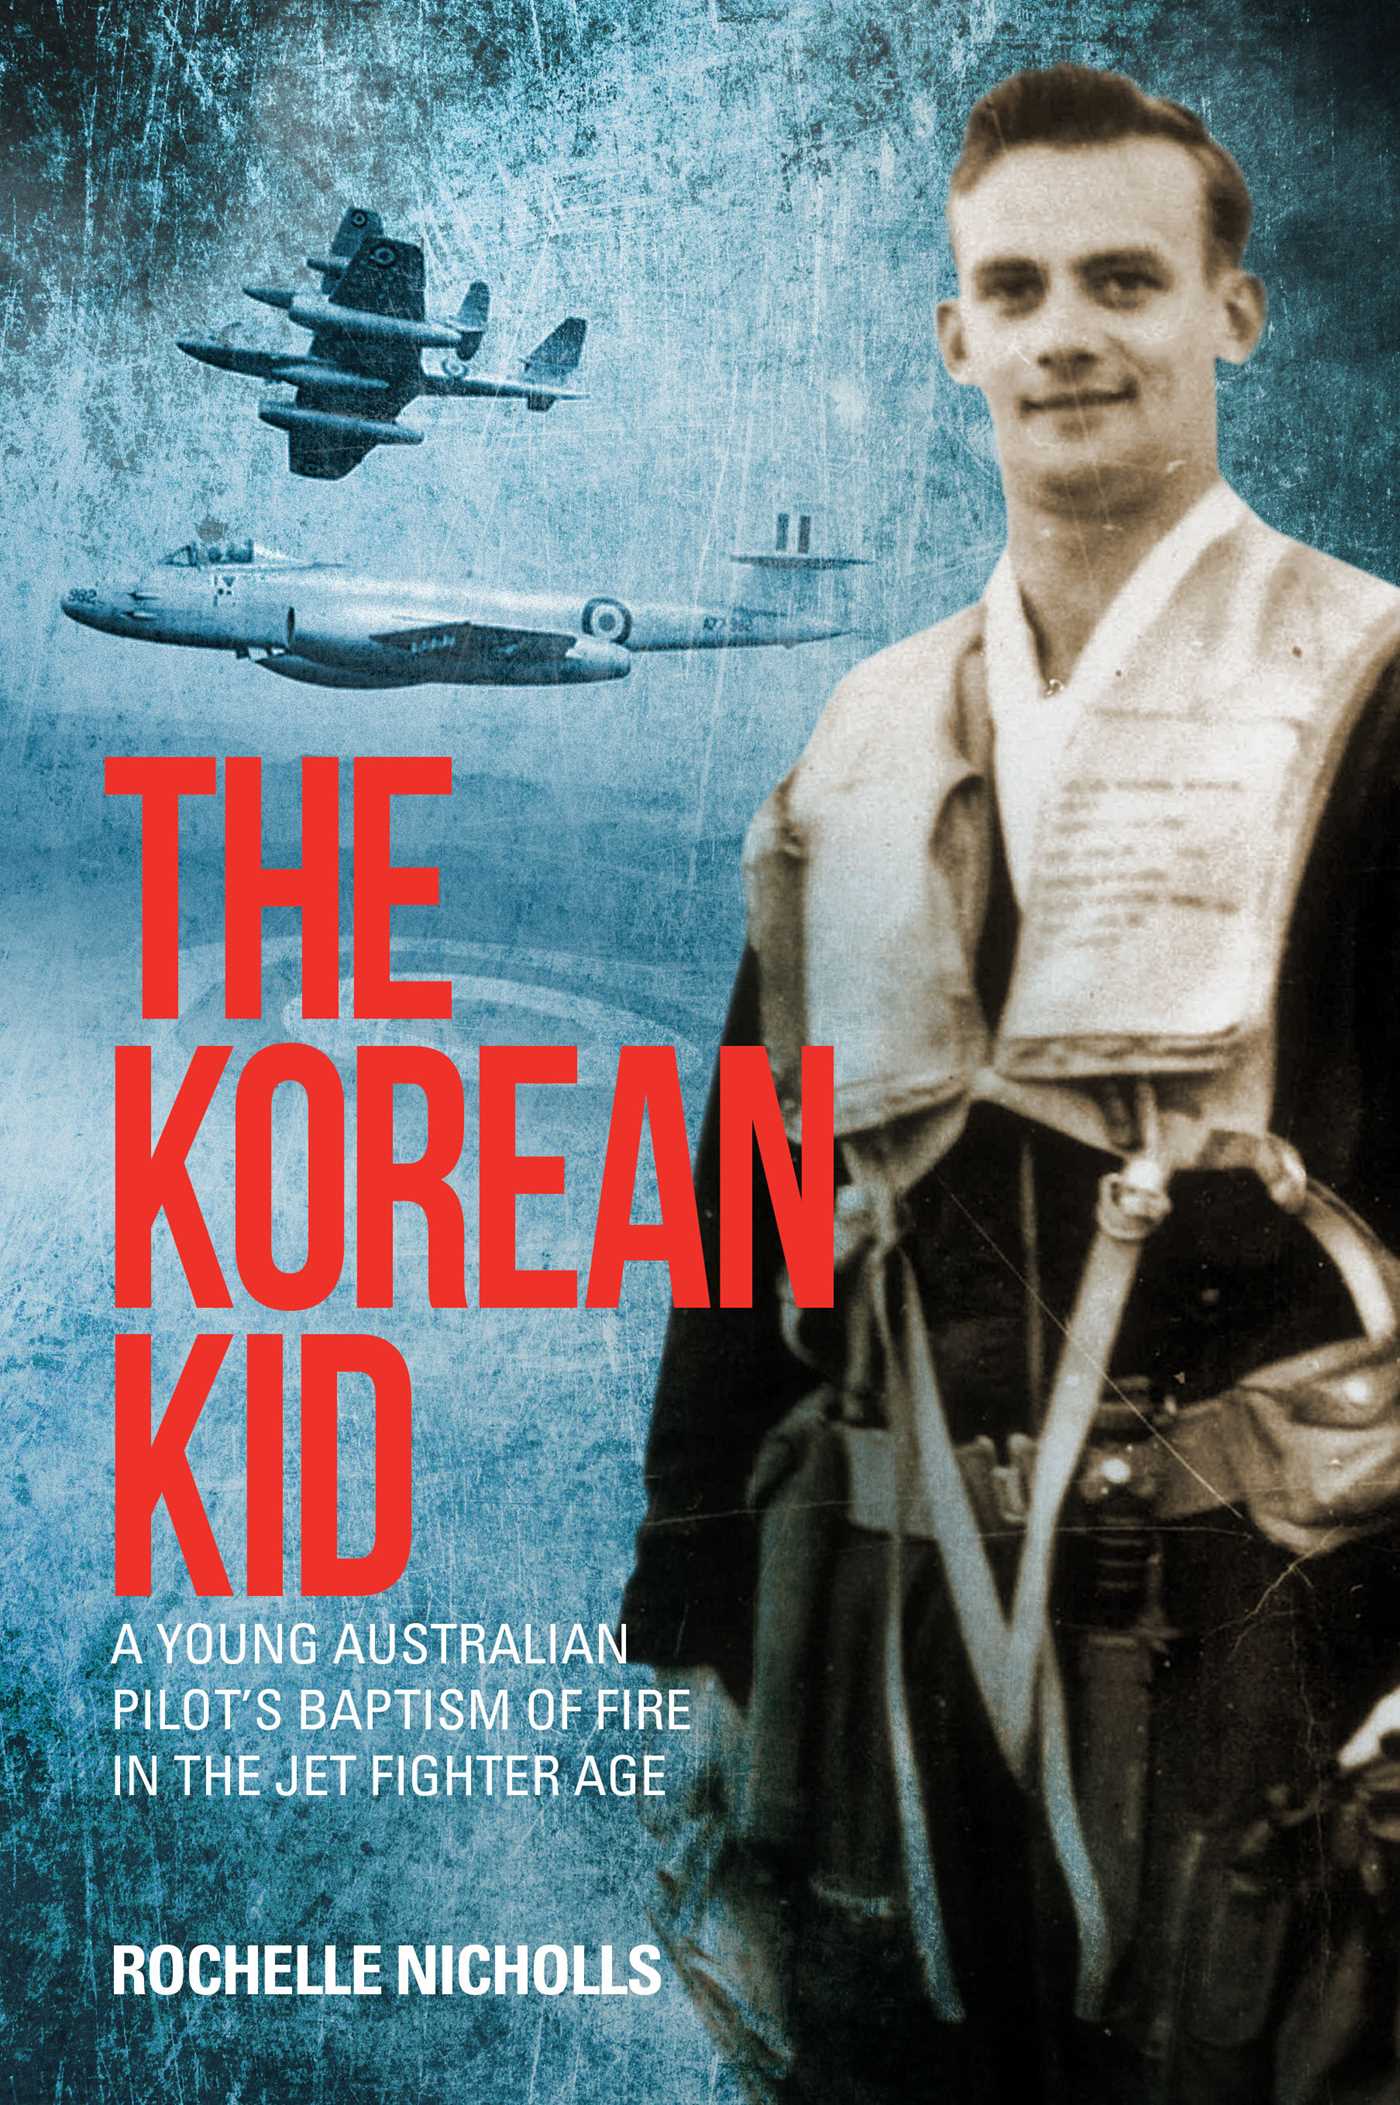 The Korean Kid: a young Australian pilot's baptism of fire in the jet fighter age